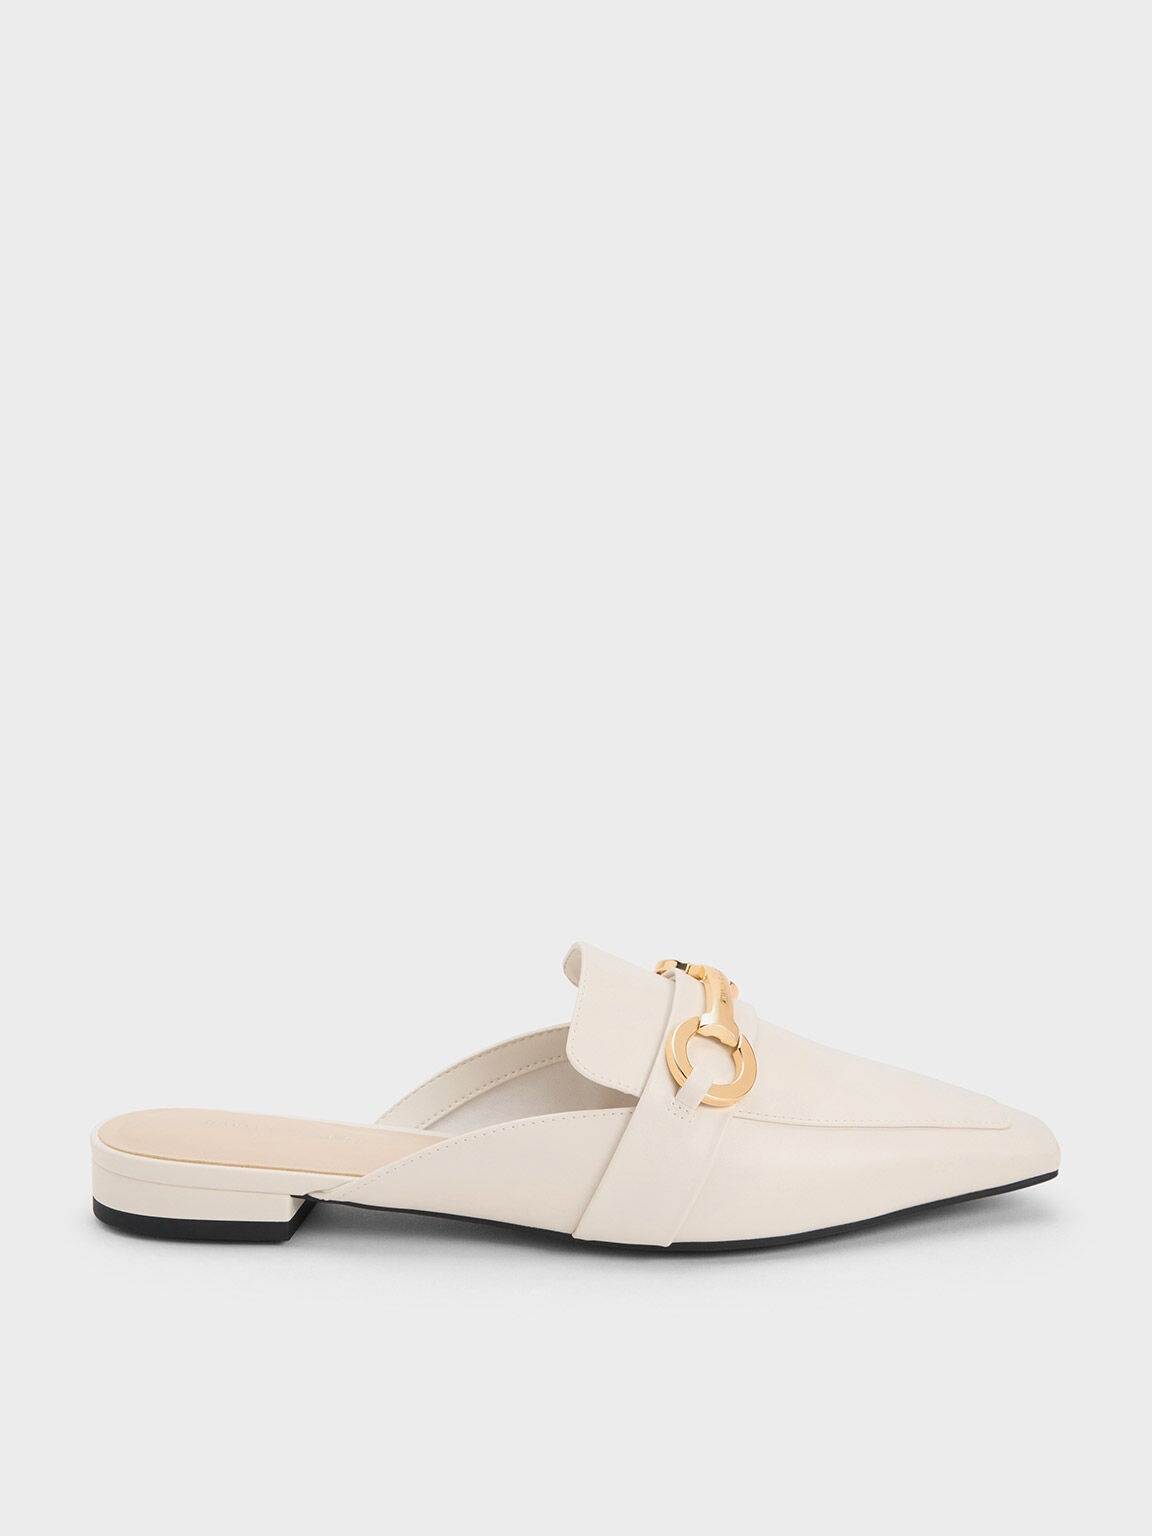 Wetland indre sikring White Metallic Accent Tapered Flat Mules - CHARLES & KEITH HU